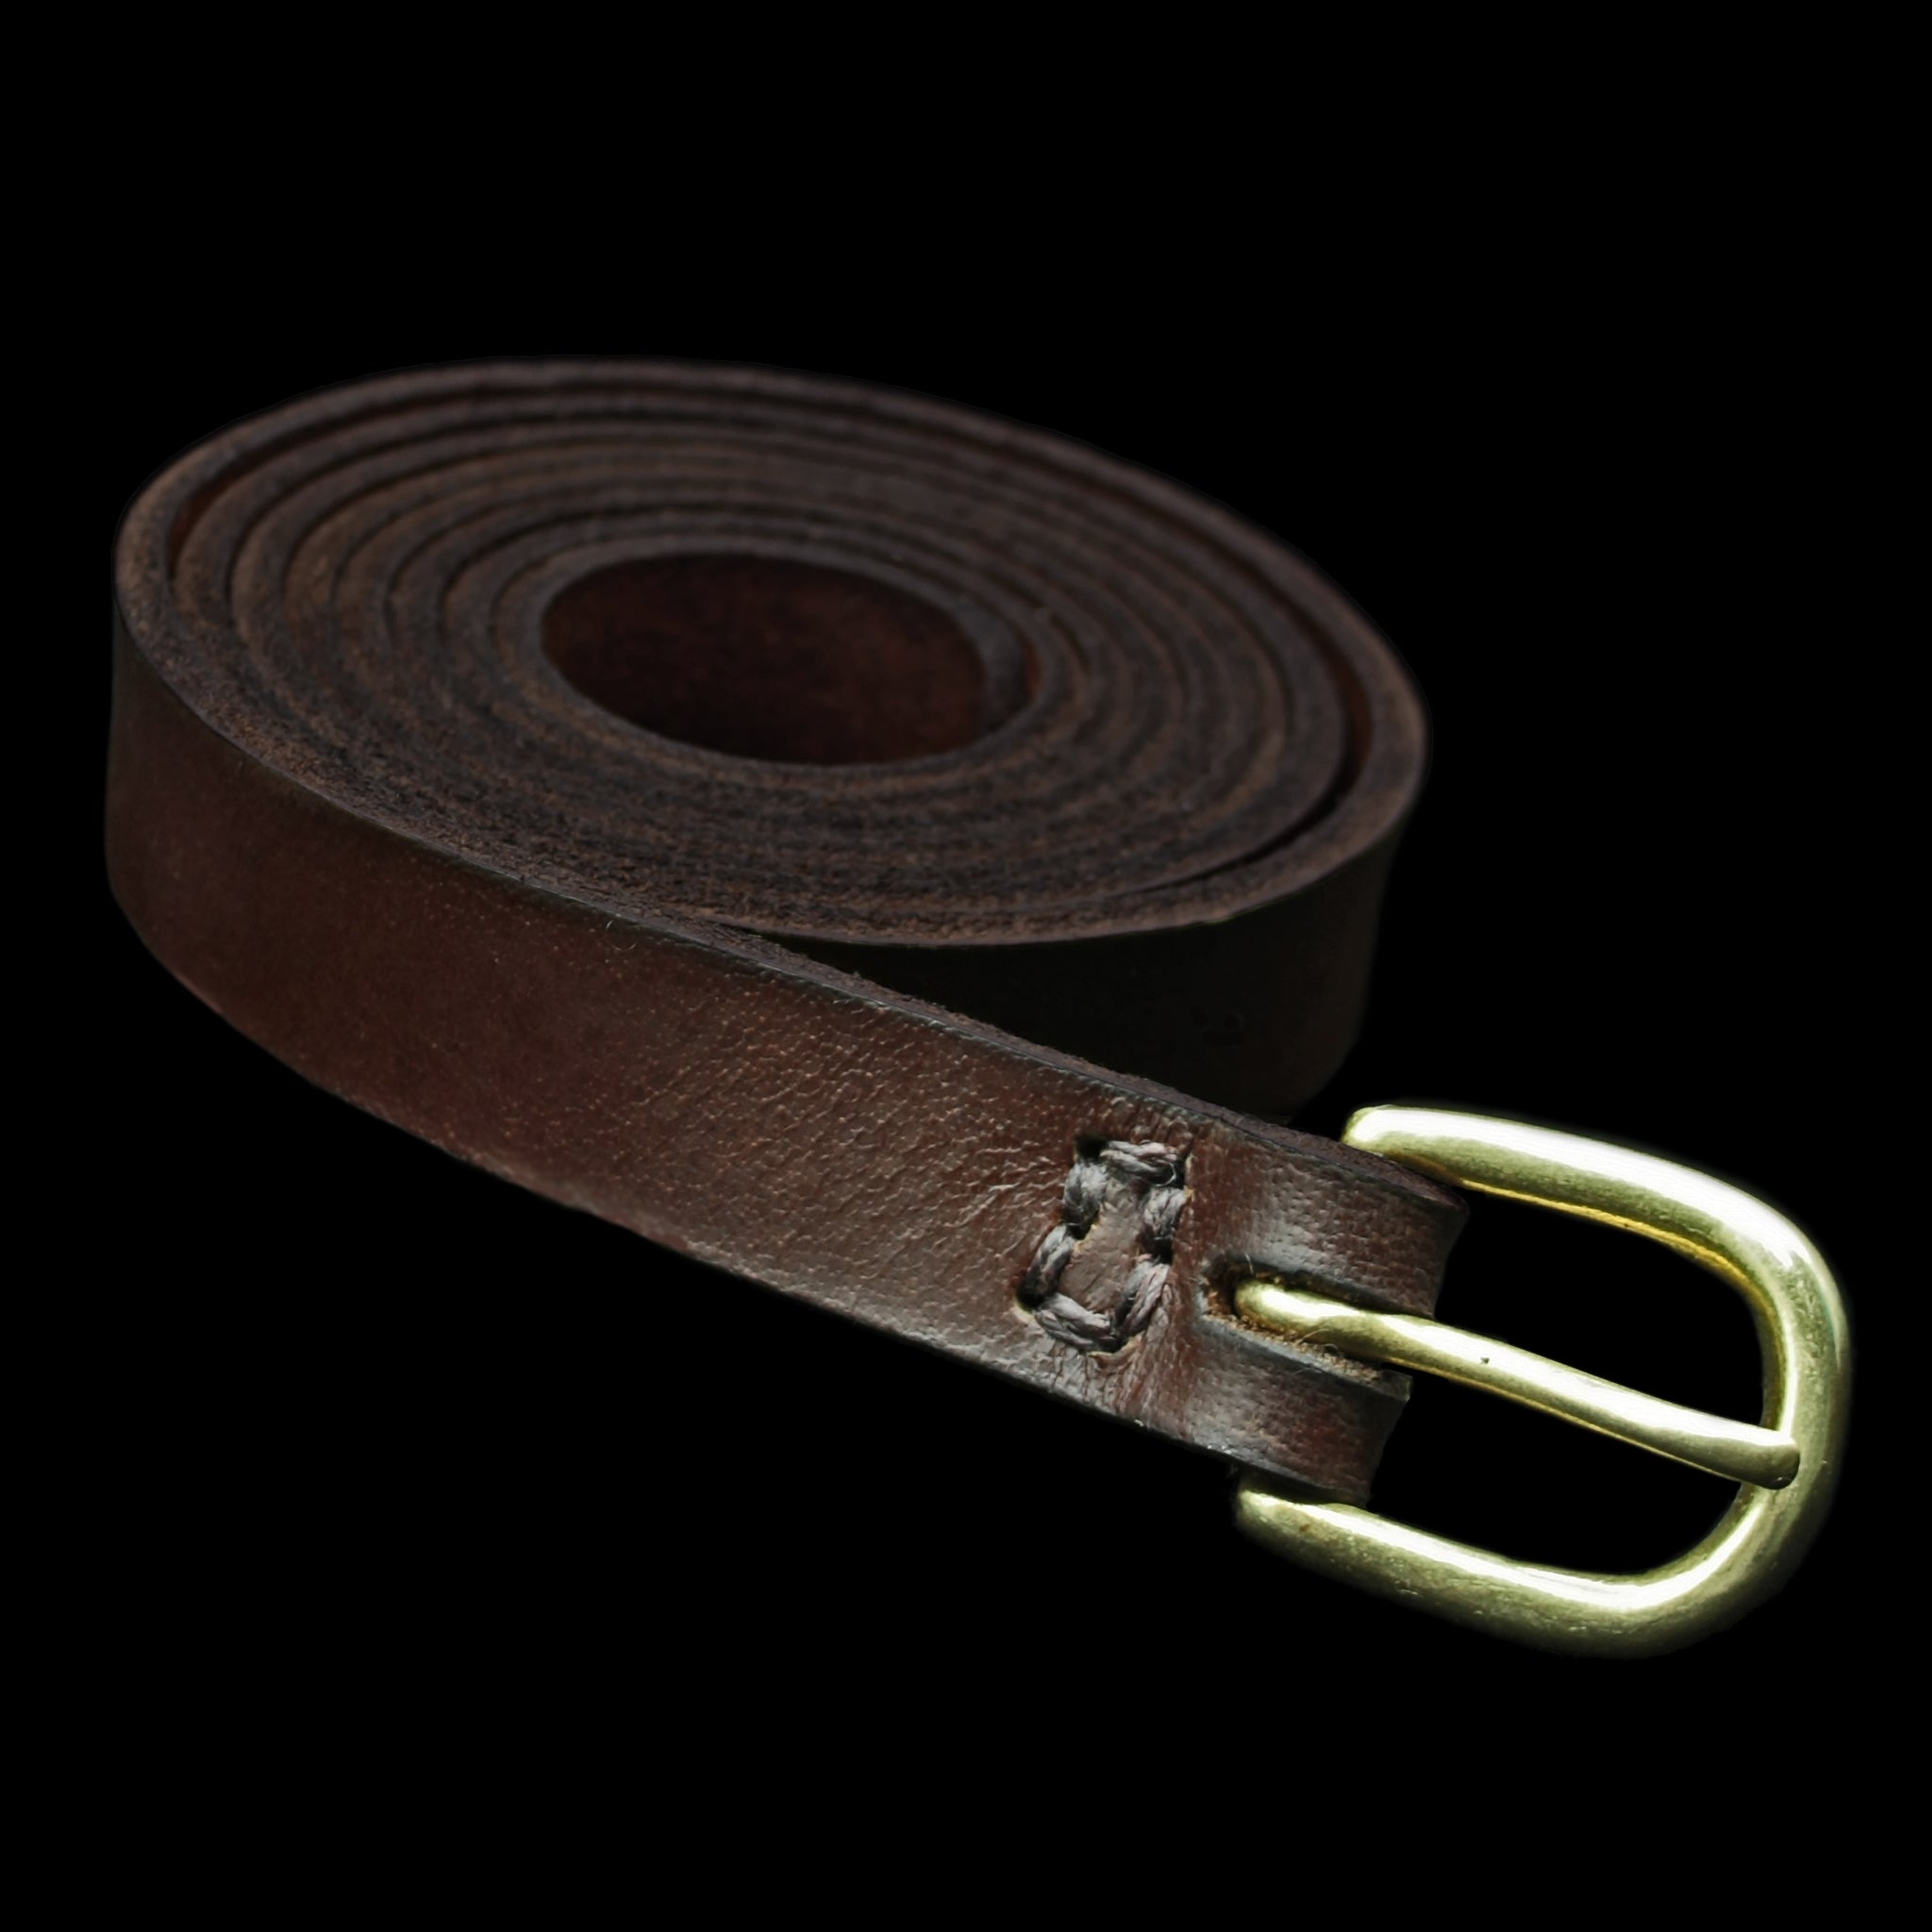 Standard Leather Baldric with Brass Buckle - Brown Leather